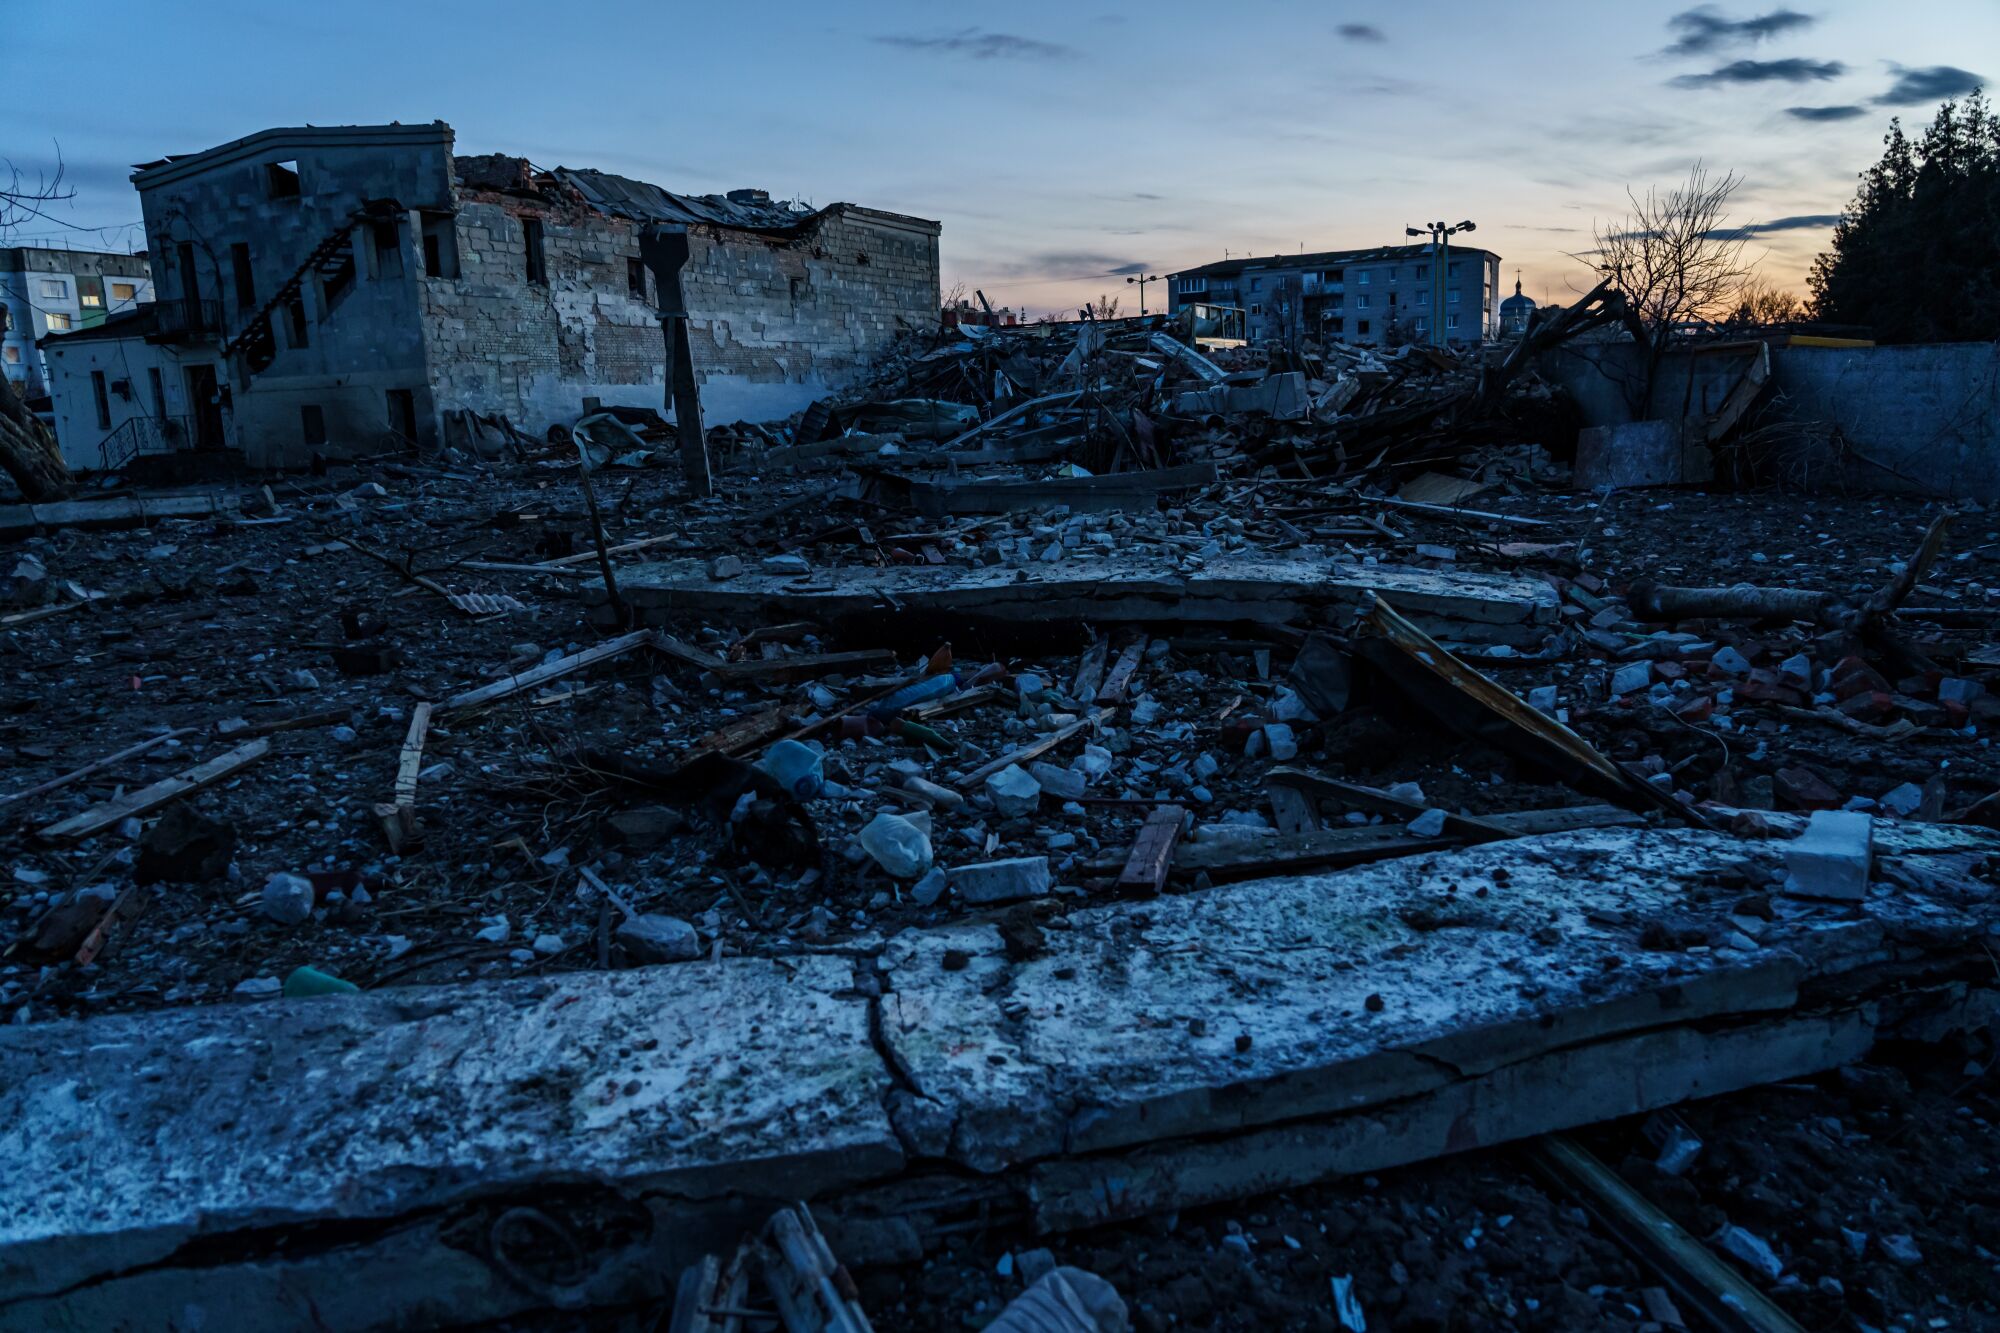 Debris is everywhere after a Russian missile strike in the town of Baryshivka, Ukraine.